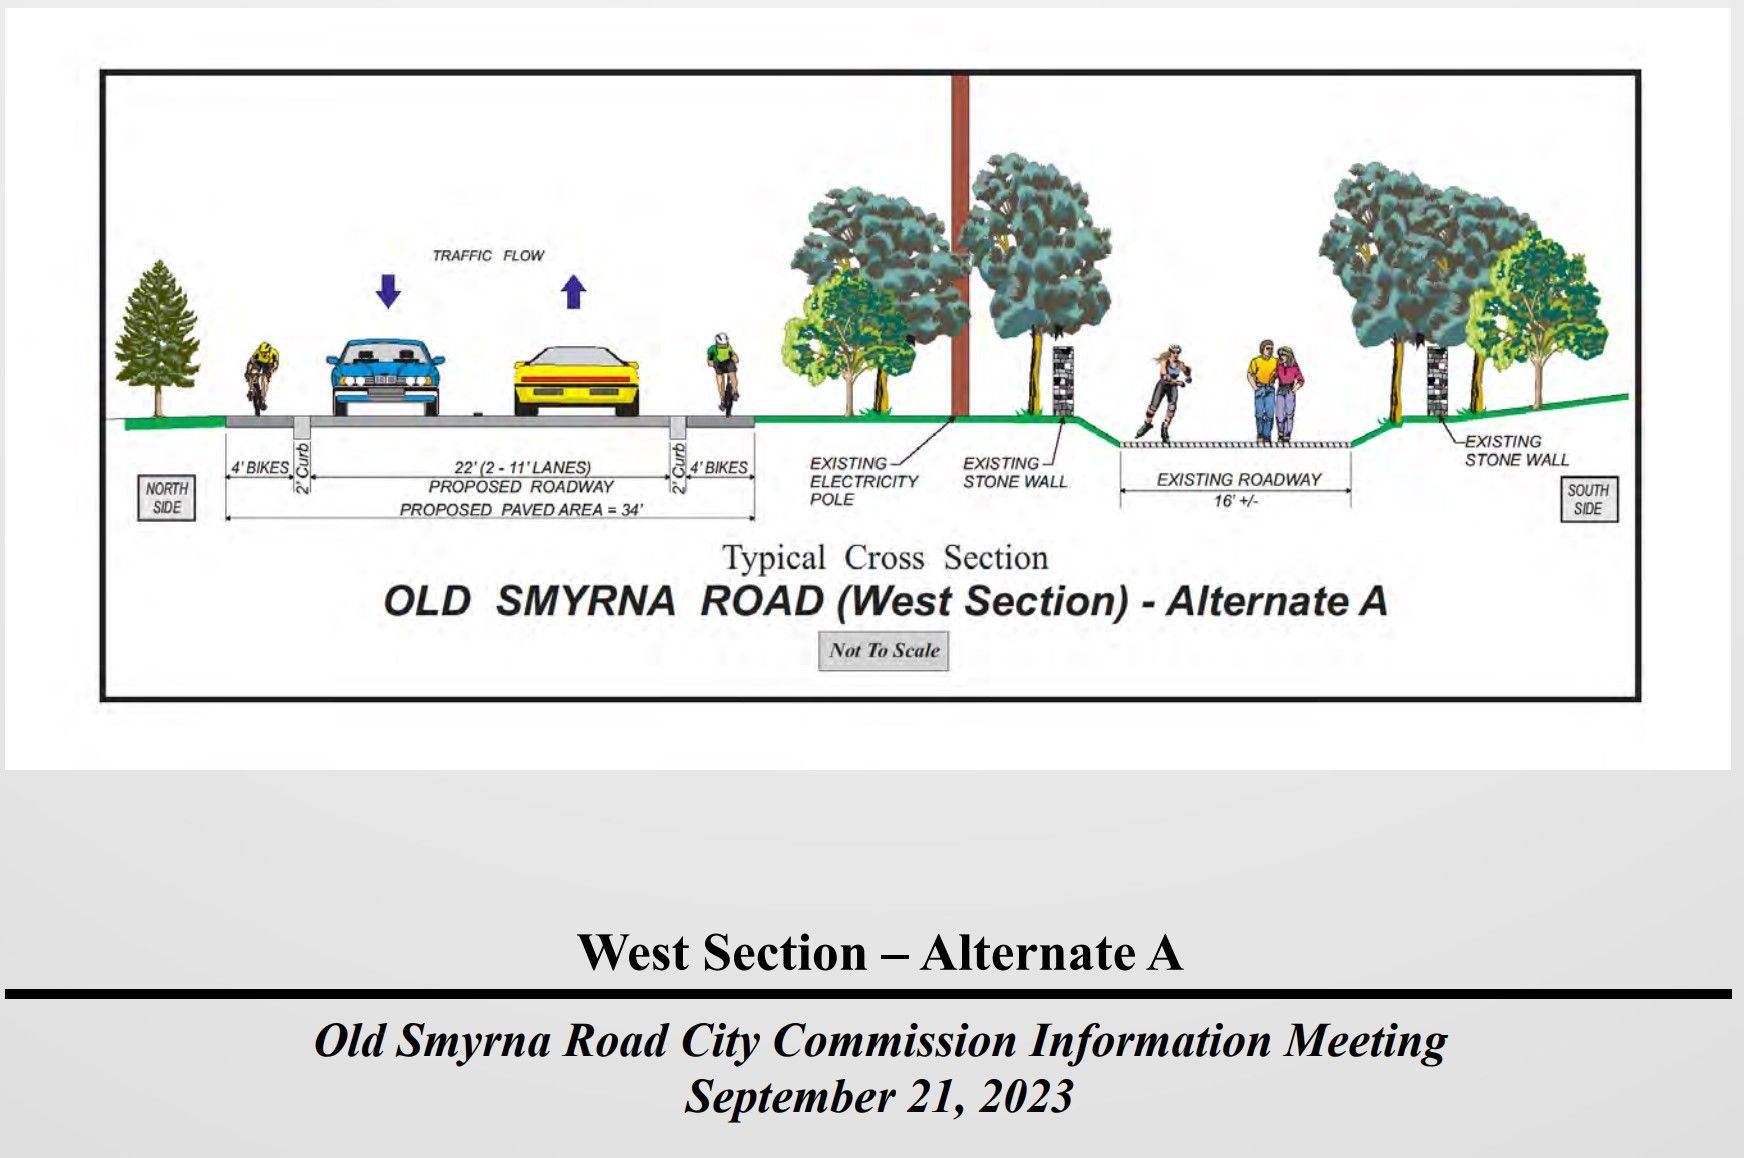 Old Smyrna Road configuration with a modern road to the north and the historic road preserved as a linear park